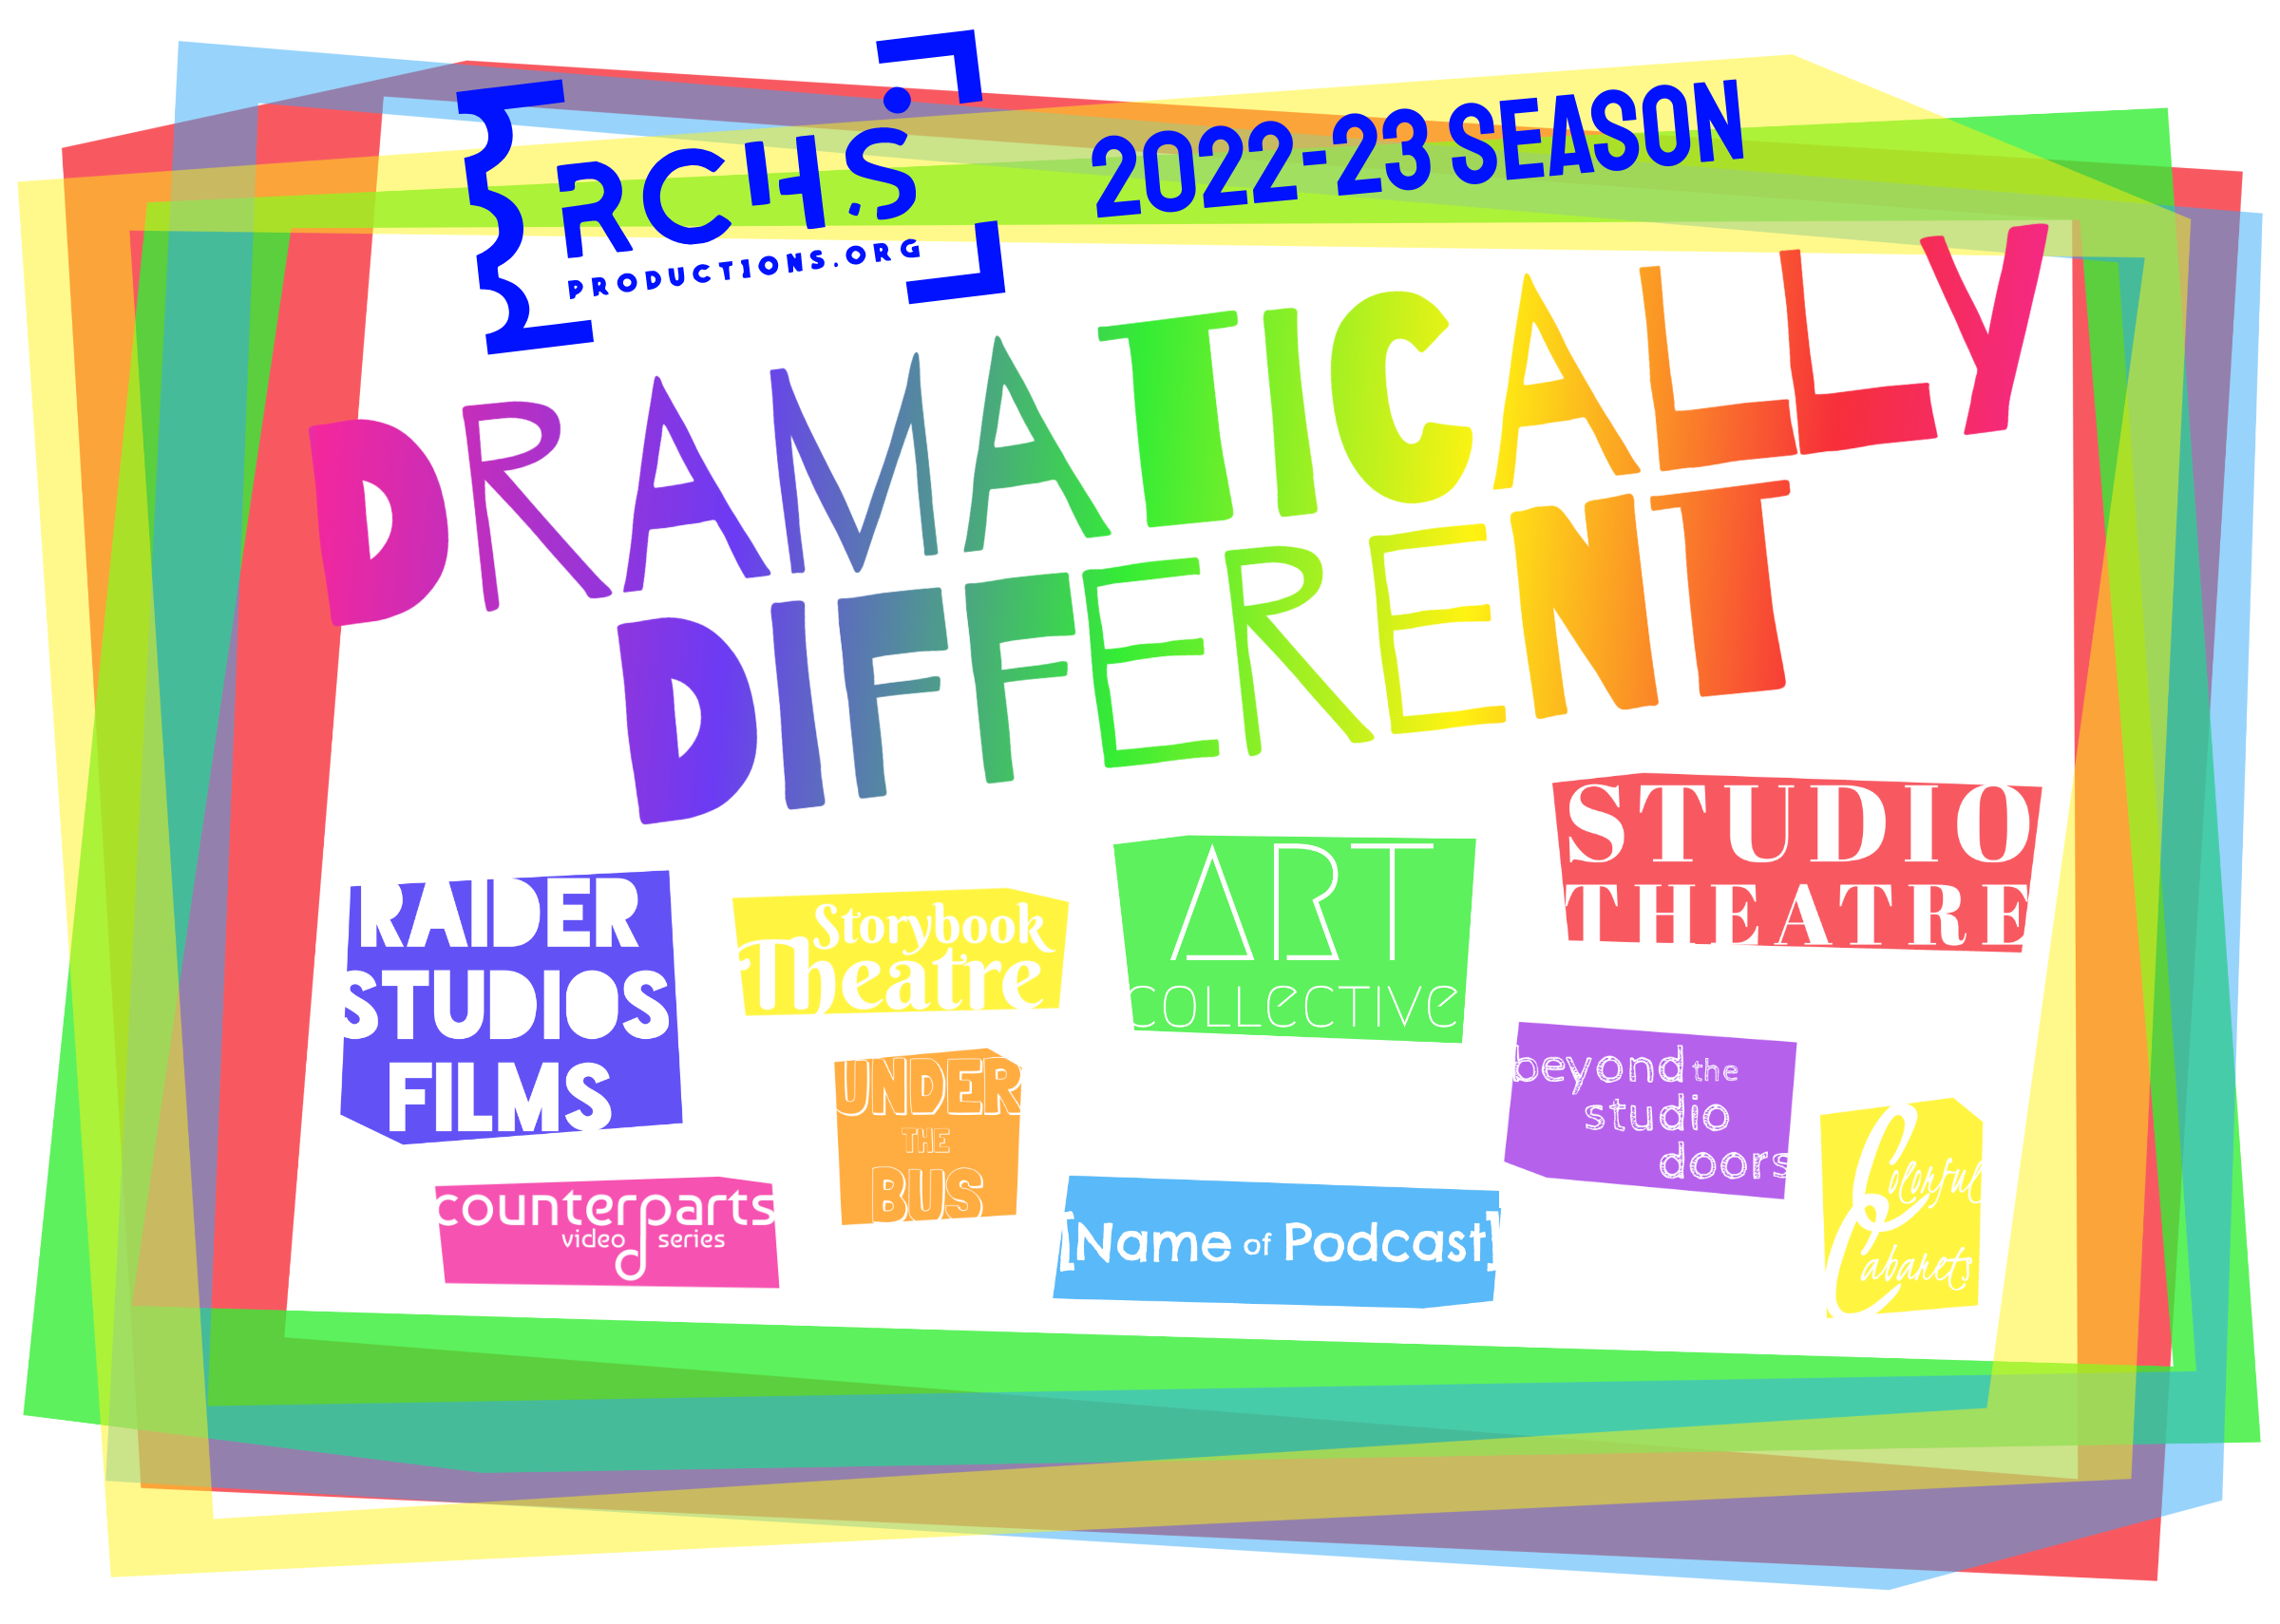 RCHS Productions' 22-23 season theme: Dramatically Different